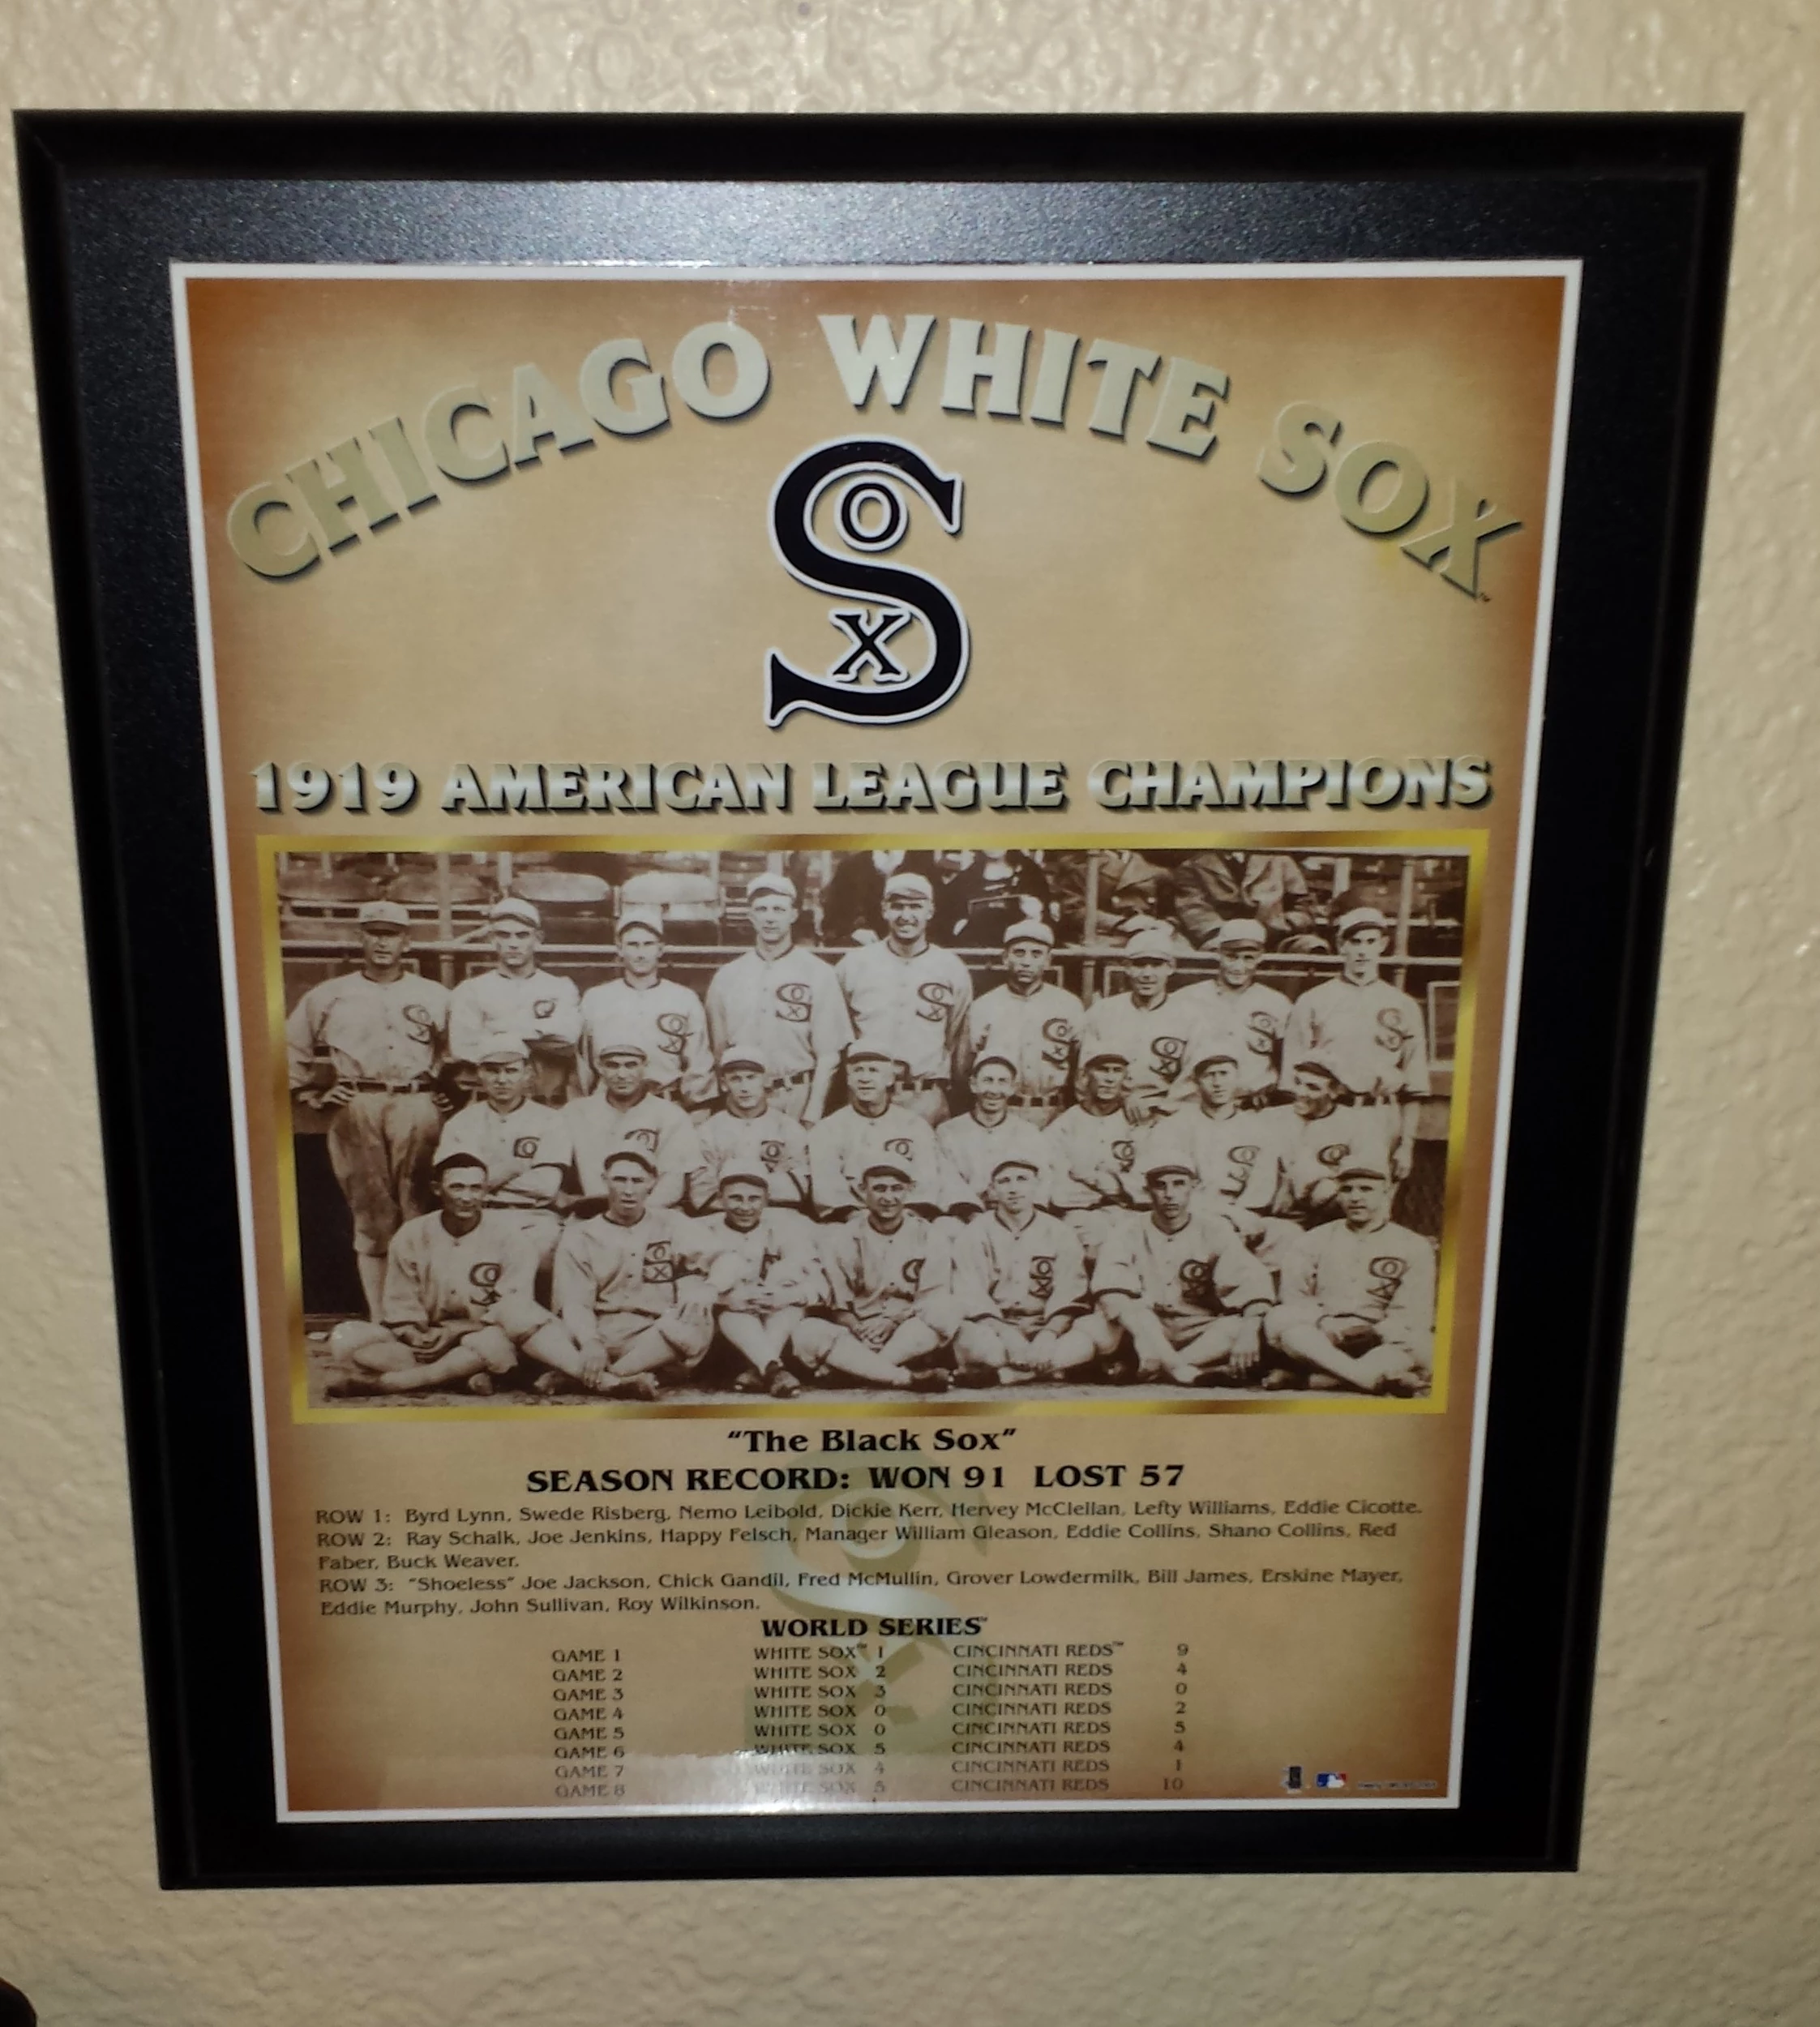 The Chicago Black Sox Were Old West Outlaws